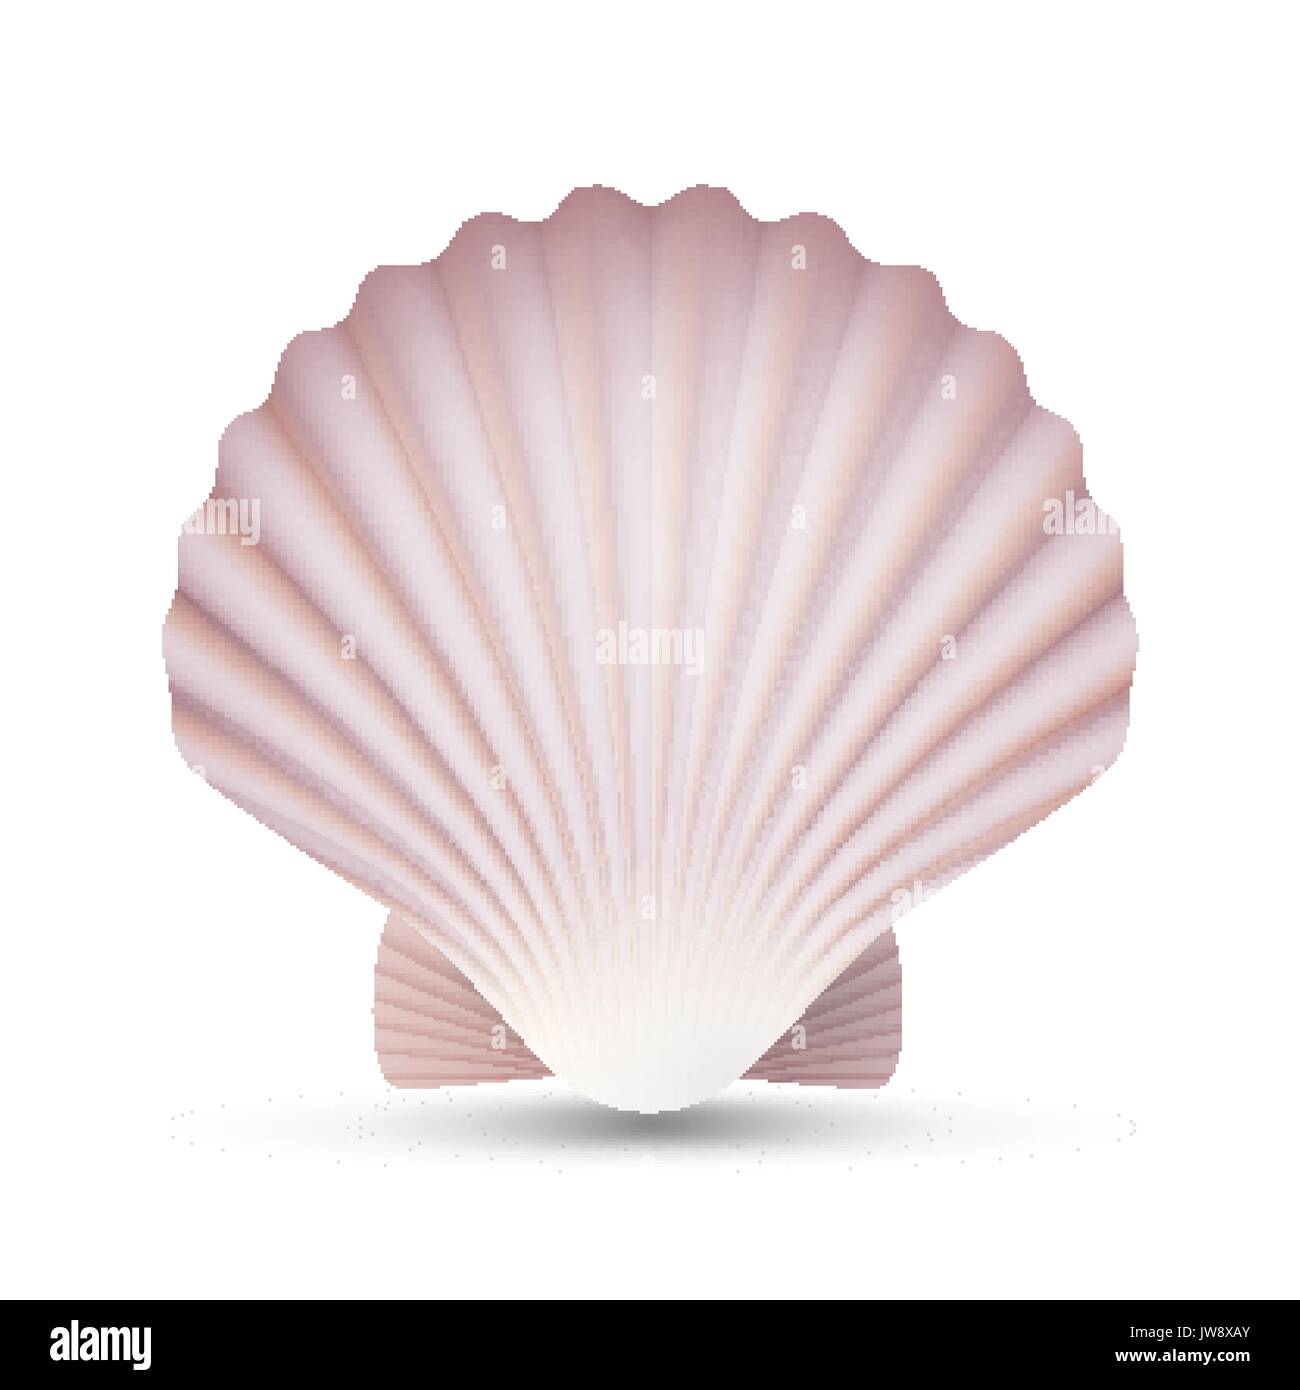 A beautiful seashell or scallop shell is toned in a blue-pink